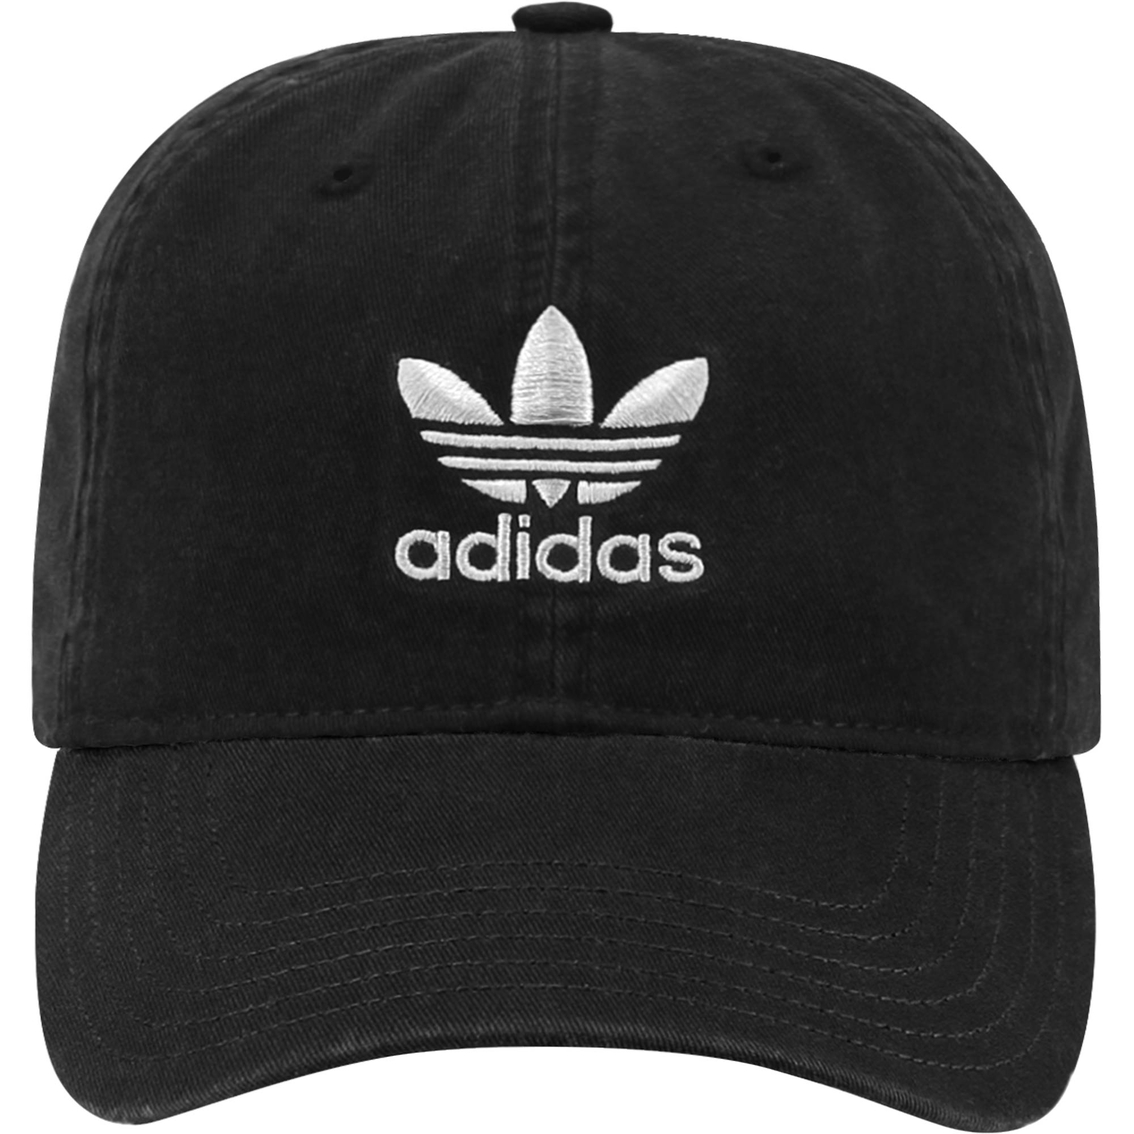 adidas Originals Relaxed Strapback Hat - Image 2 of 4